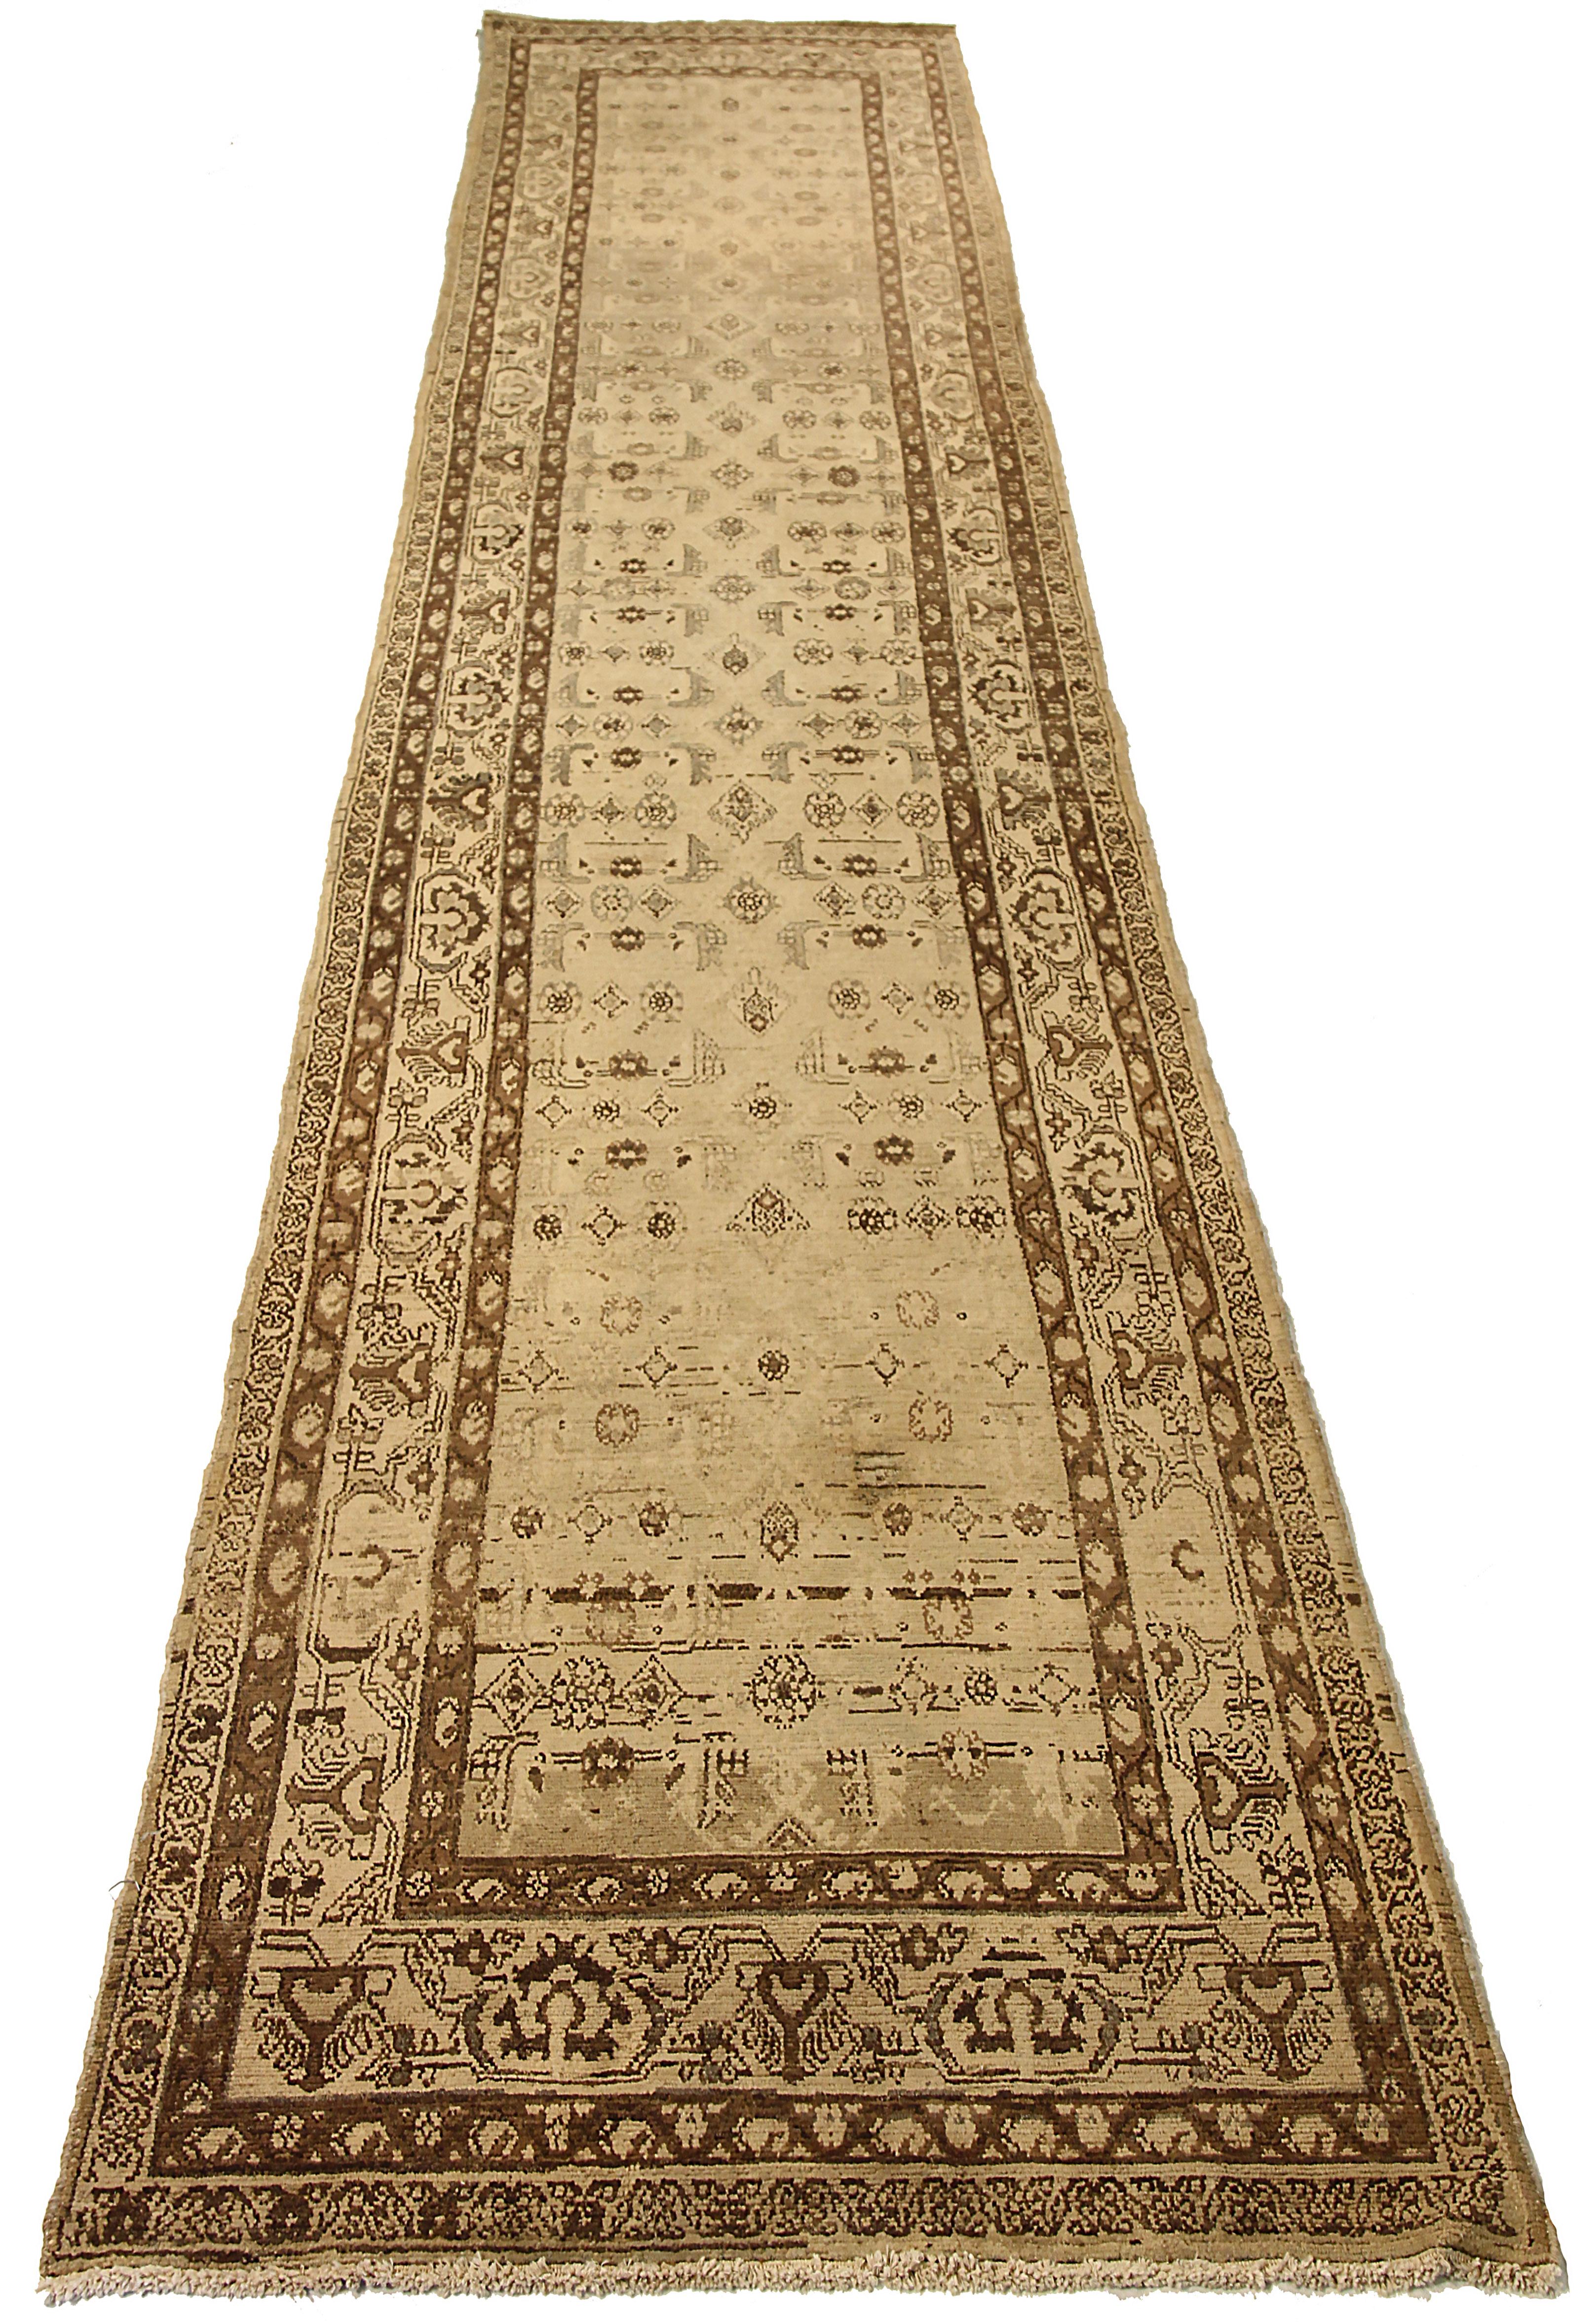 Antique Persian runner rug handwoven from the finest sheep’s wool. It’s colored with all-natural vegetable dyes that are safe for humans and pets. It’s a traditional Malayer design featuring tribal design on an ivory field. It’s a lovely piece to